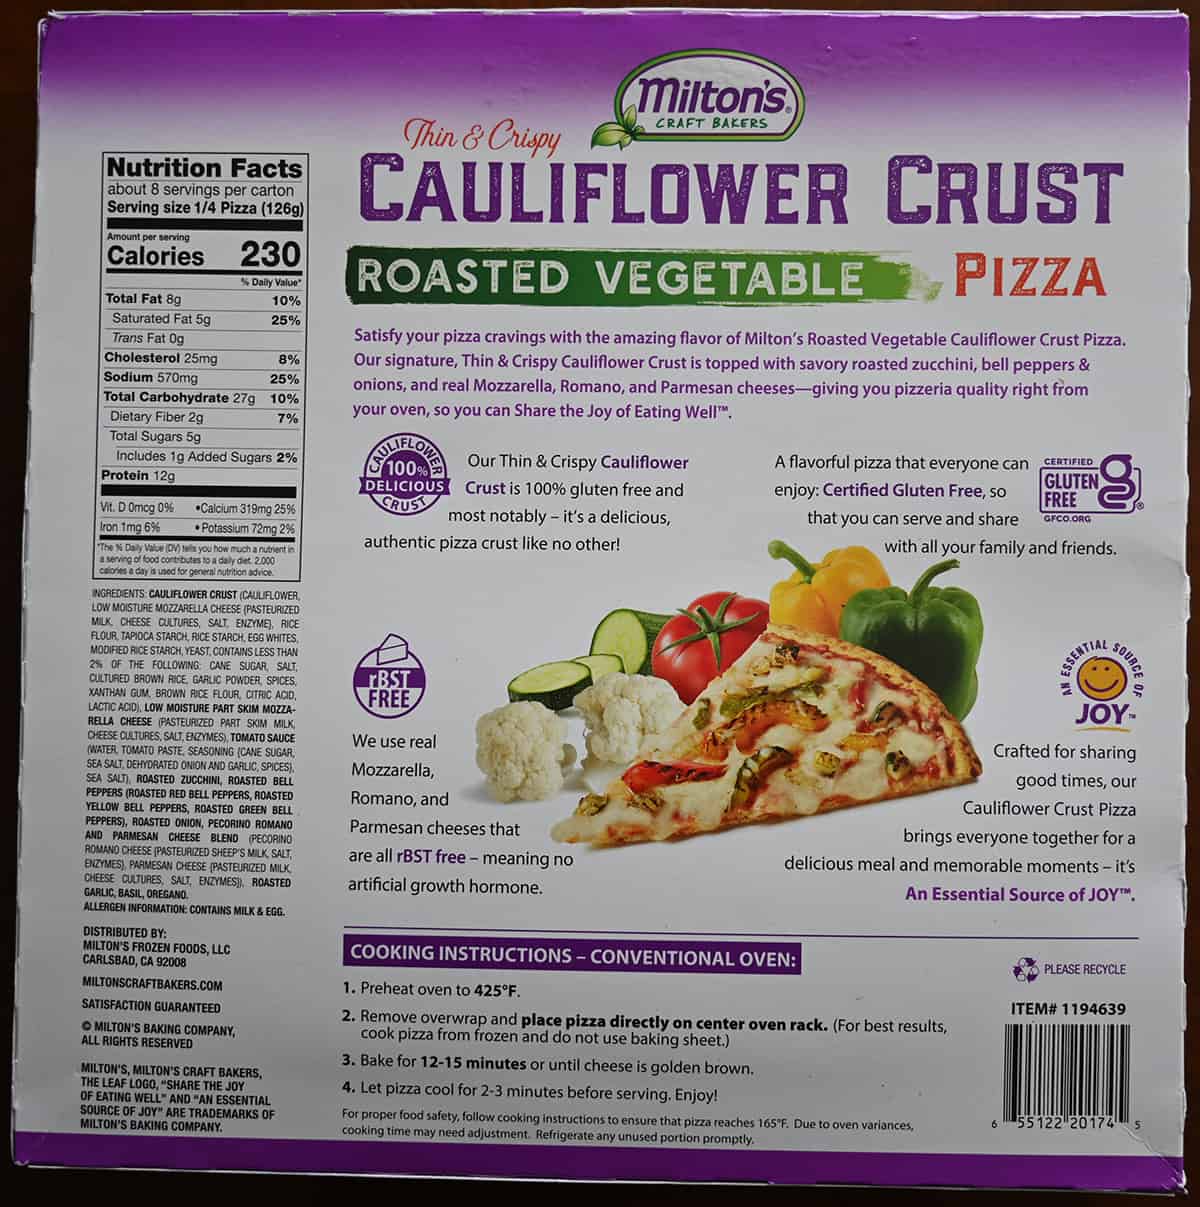 Image of the back of the cauliflower crust pizza box showing ingredients, calories and cooking instructions.